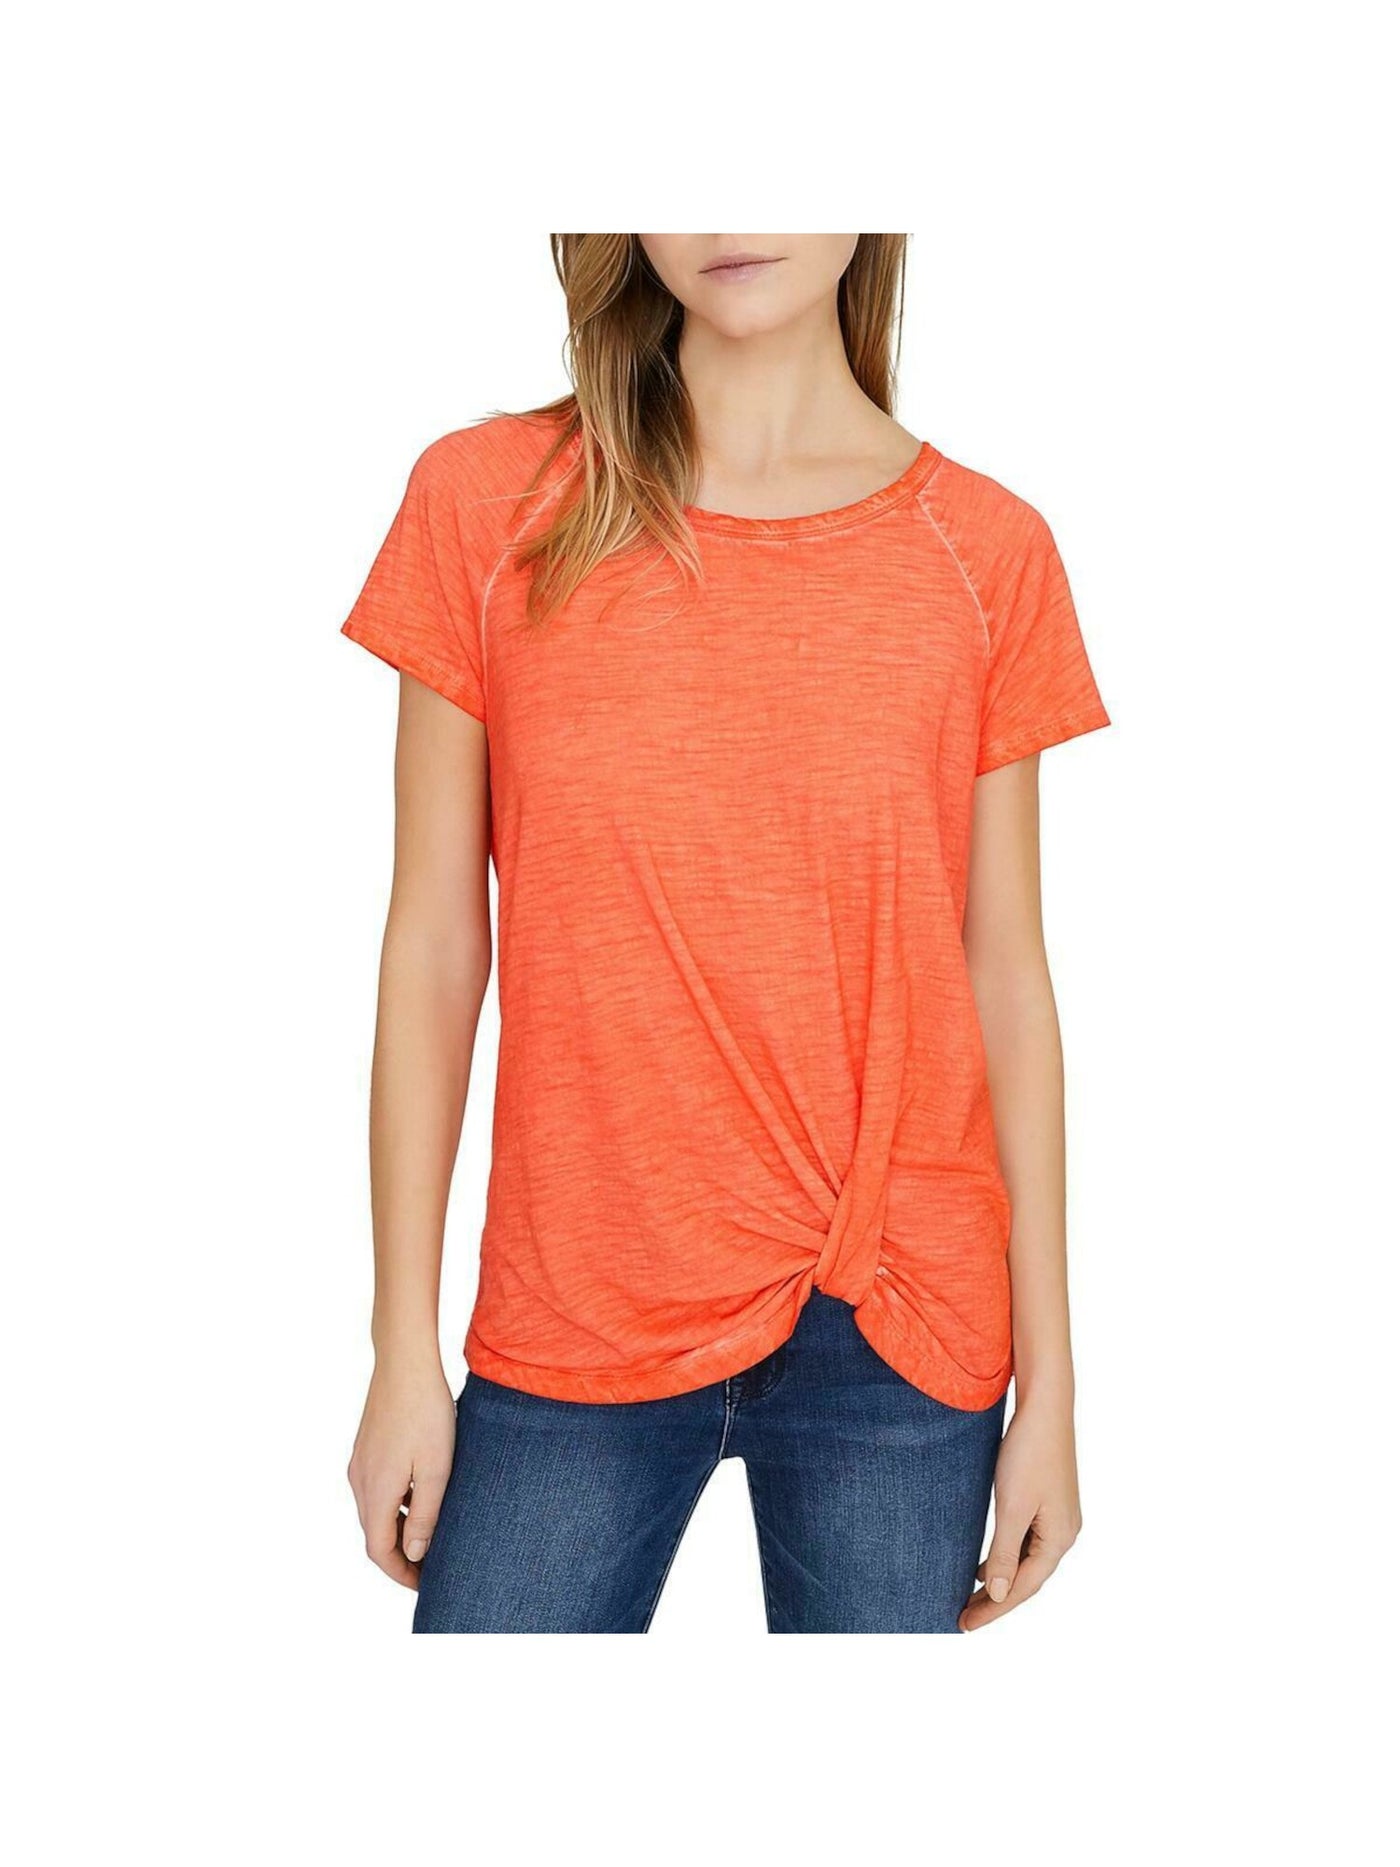 SANCTUARY Womens Coral Heather Short Sleeve Crew Neck T-Shirt Top Size: XS